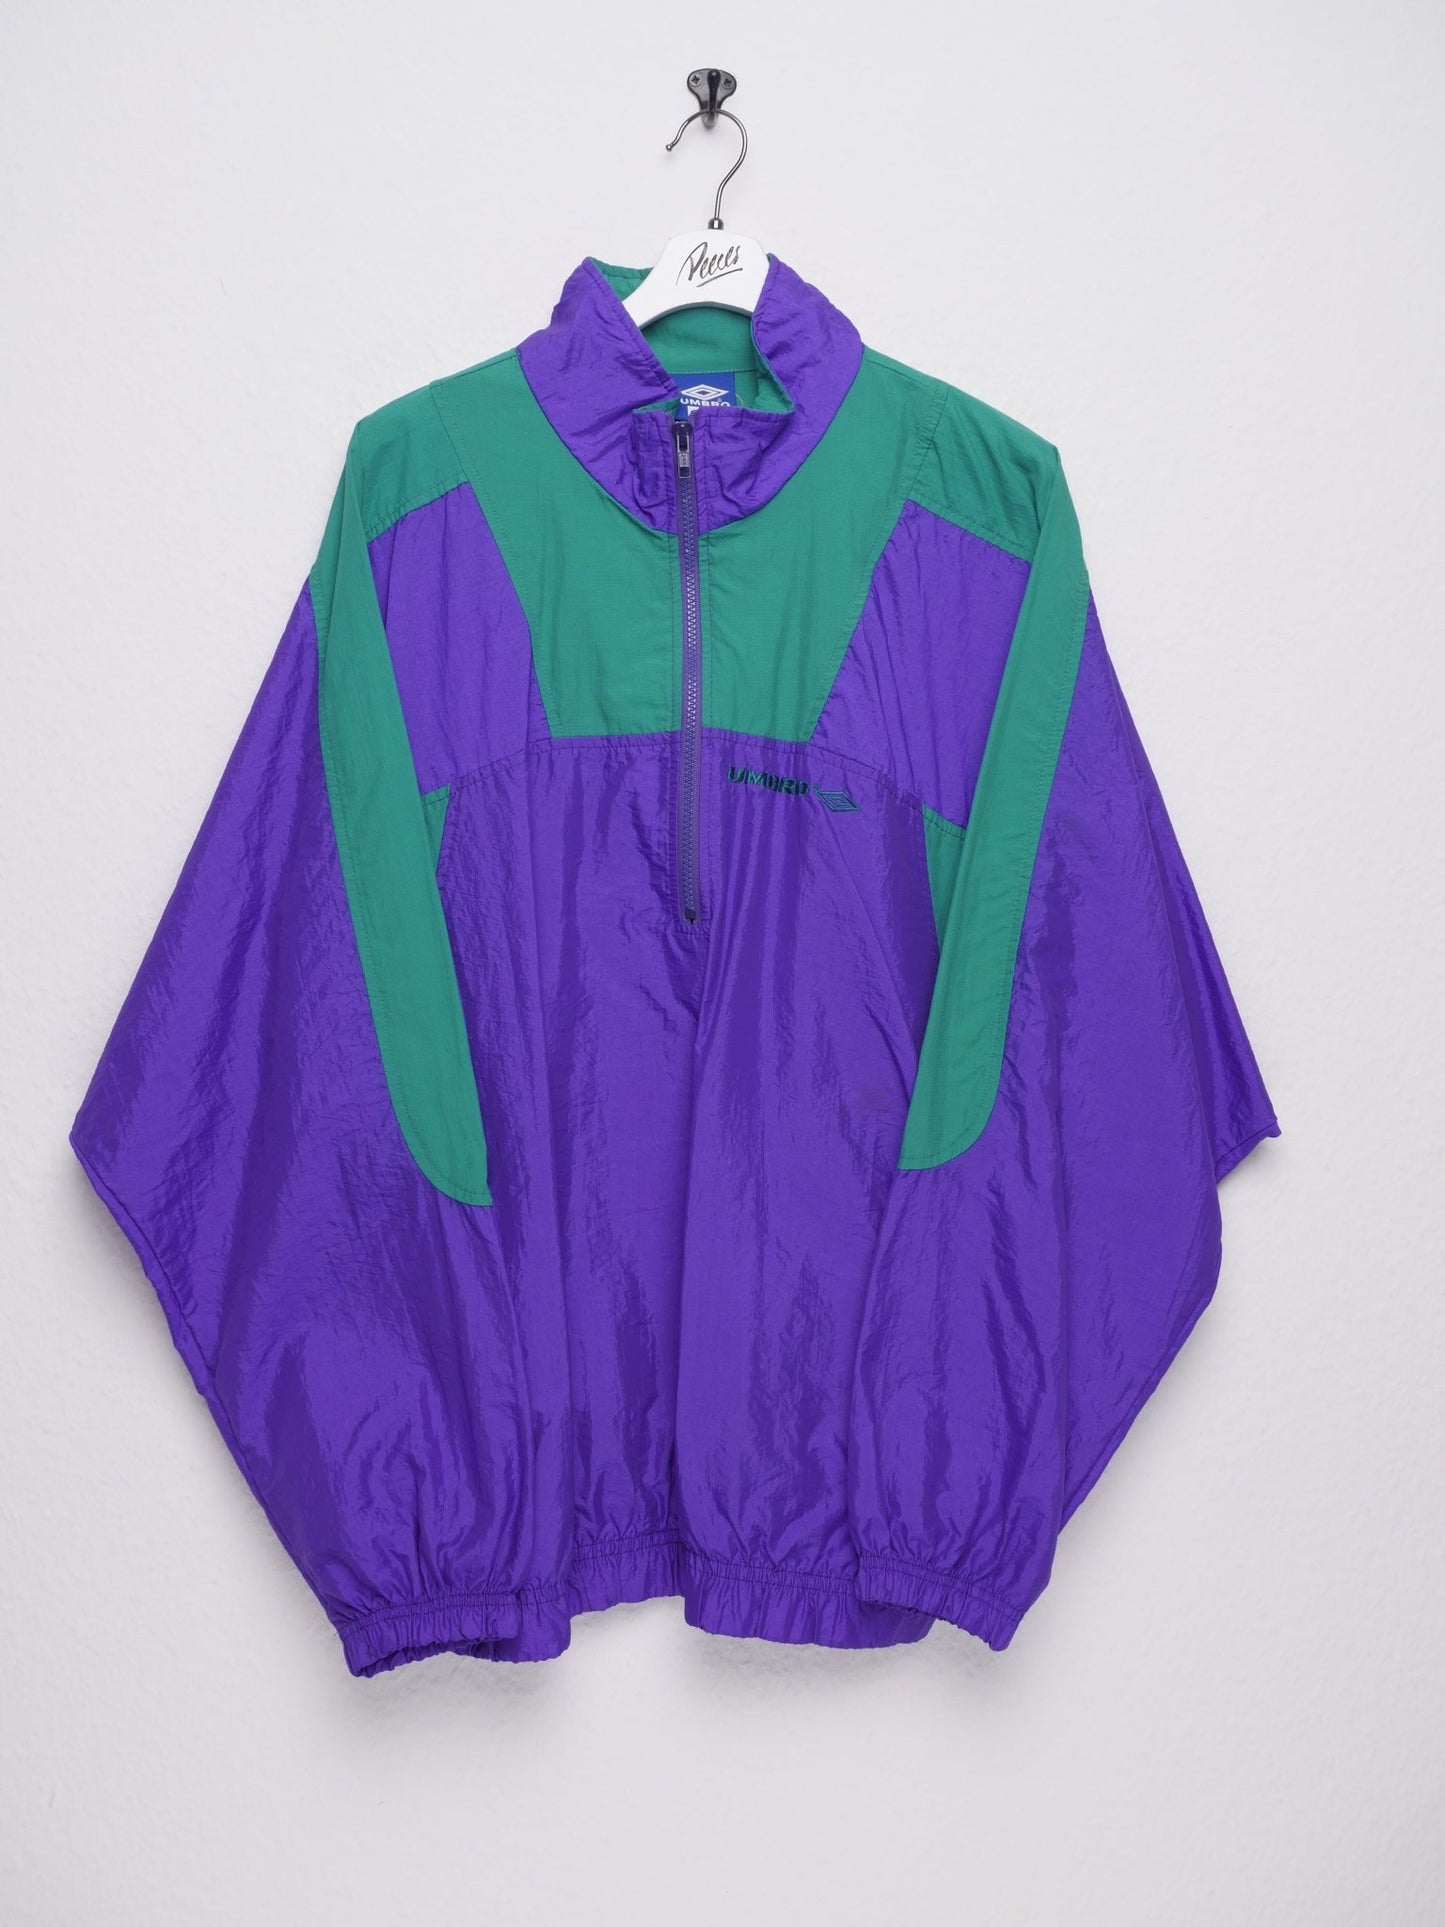 umbro embroidered Spellout two toned half zip Vintage Track Jacket - Peeces